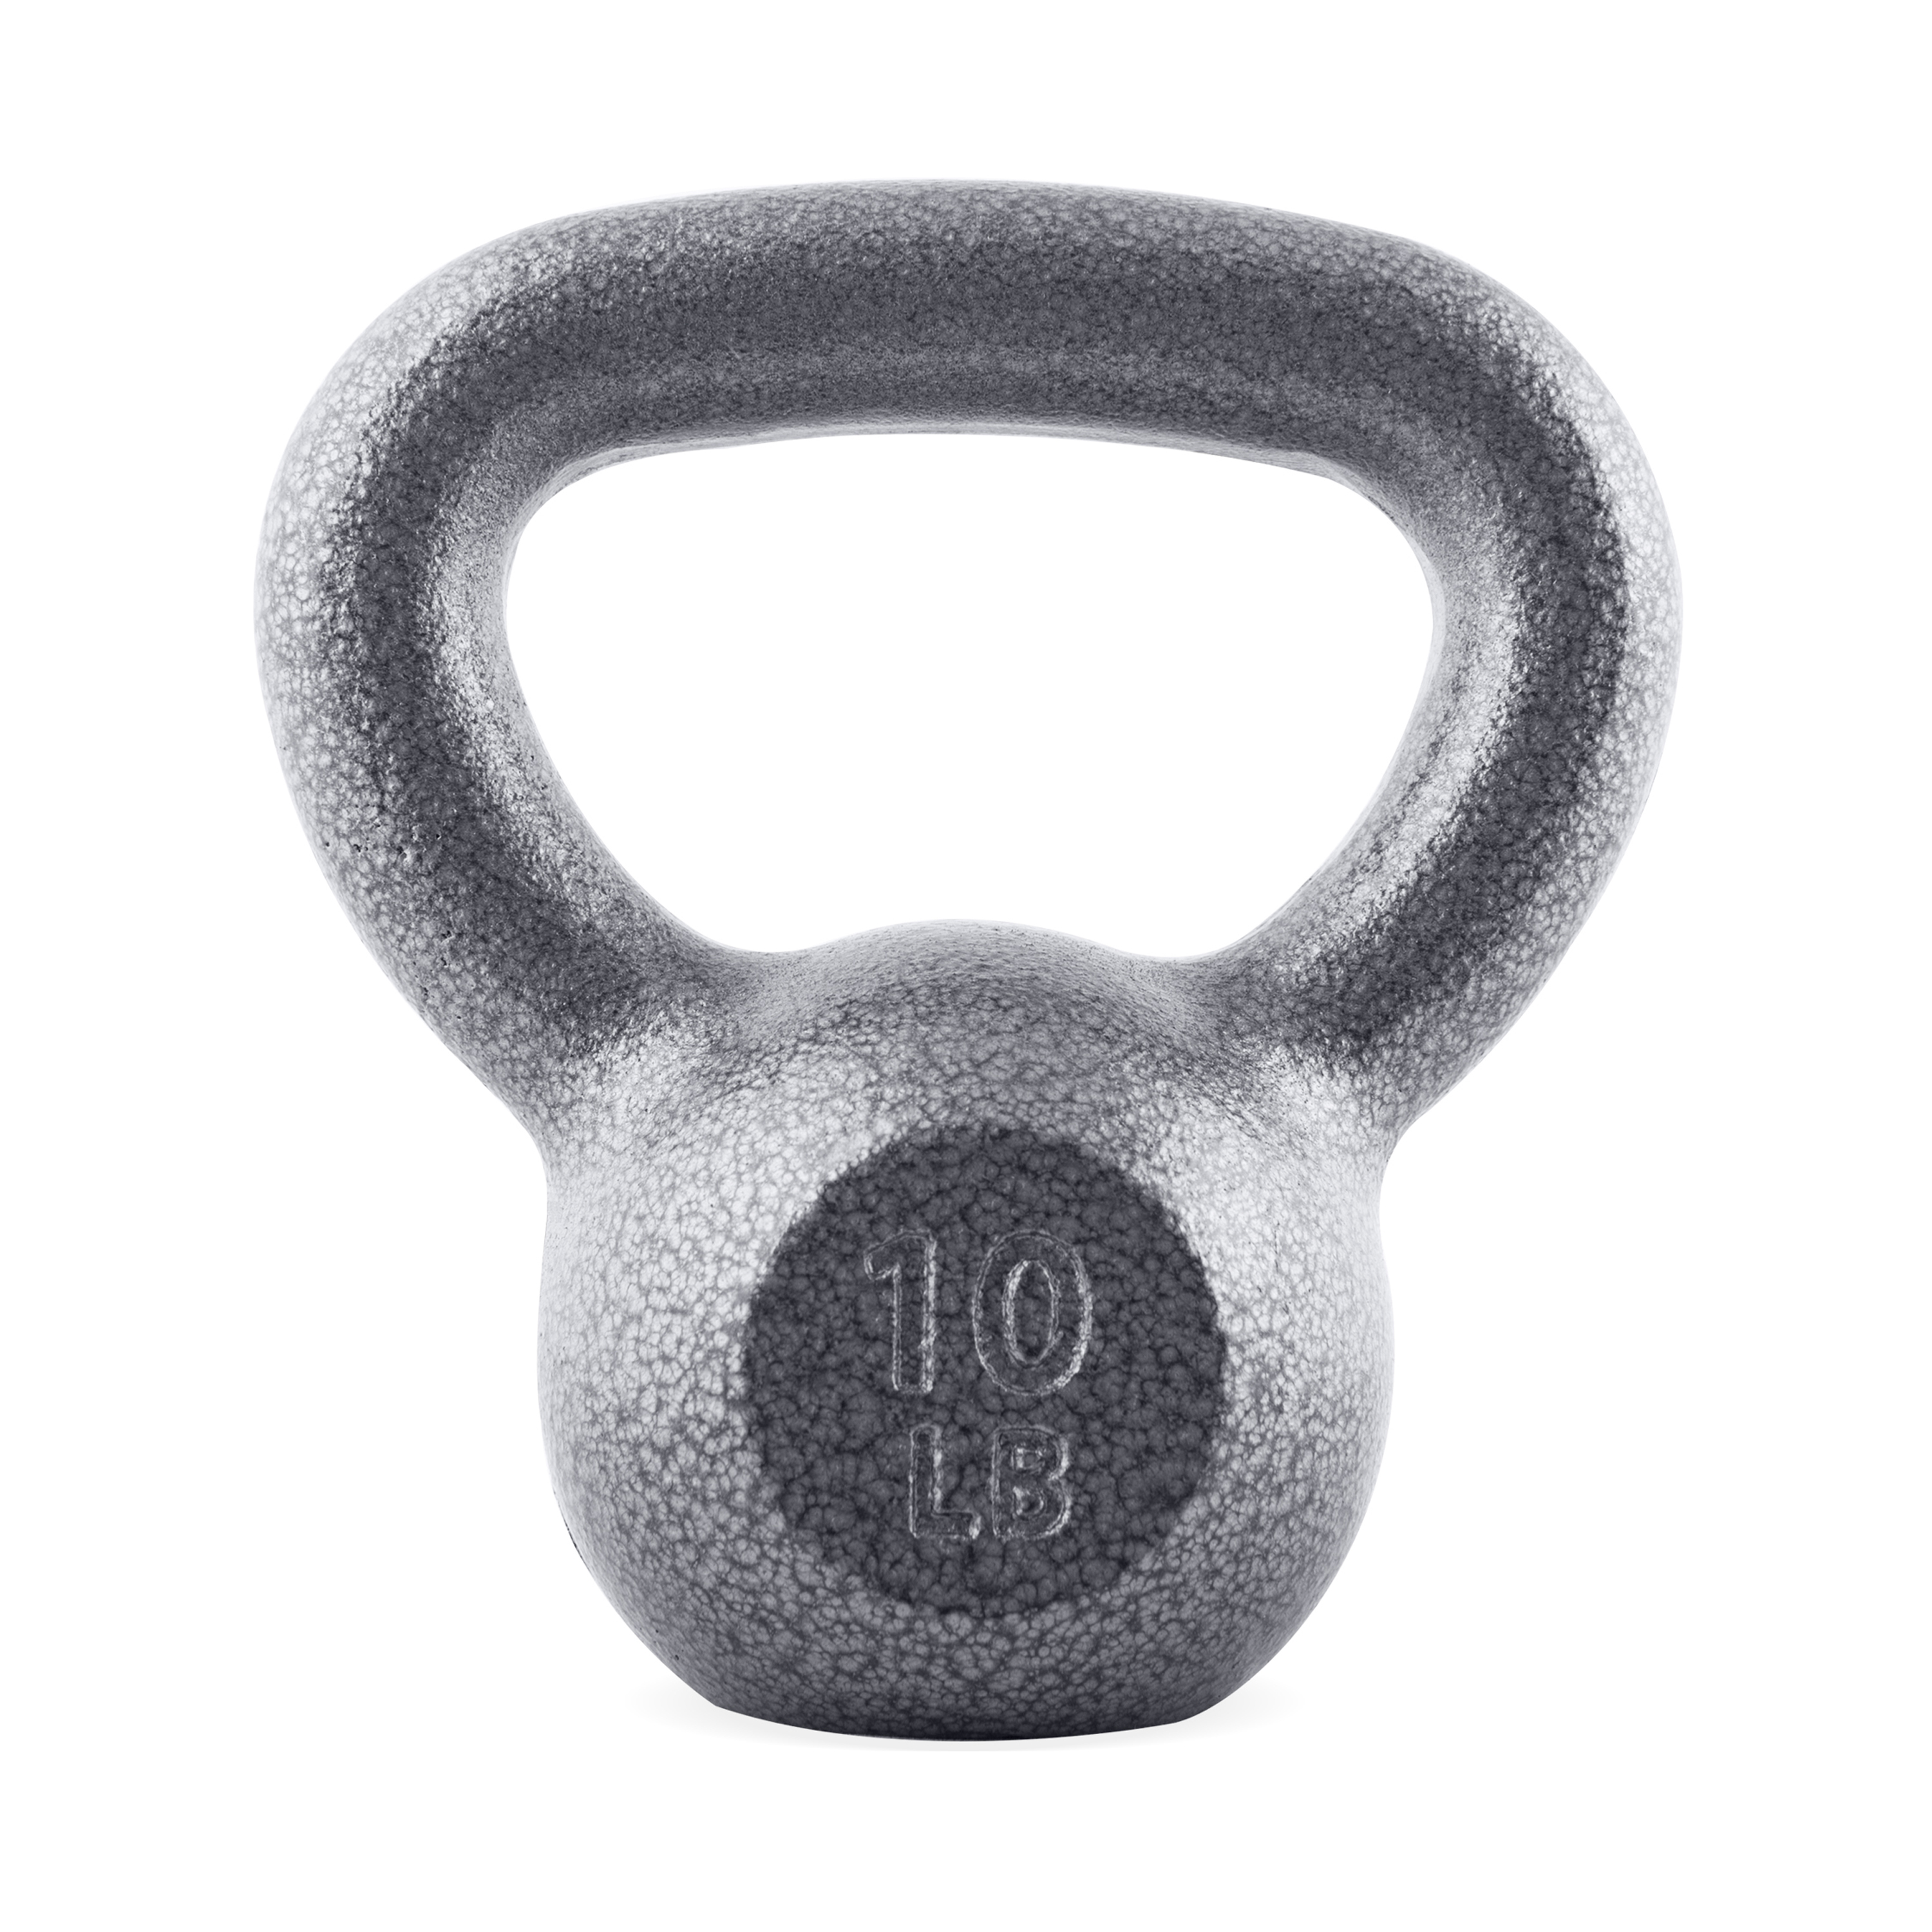 CAP Barbell Cast Iron Kettlebell, Single, 10-80 Pounds - image 1 of 7